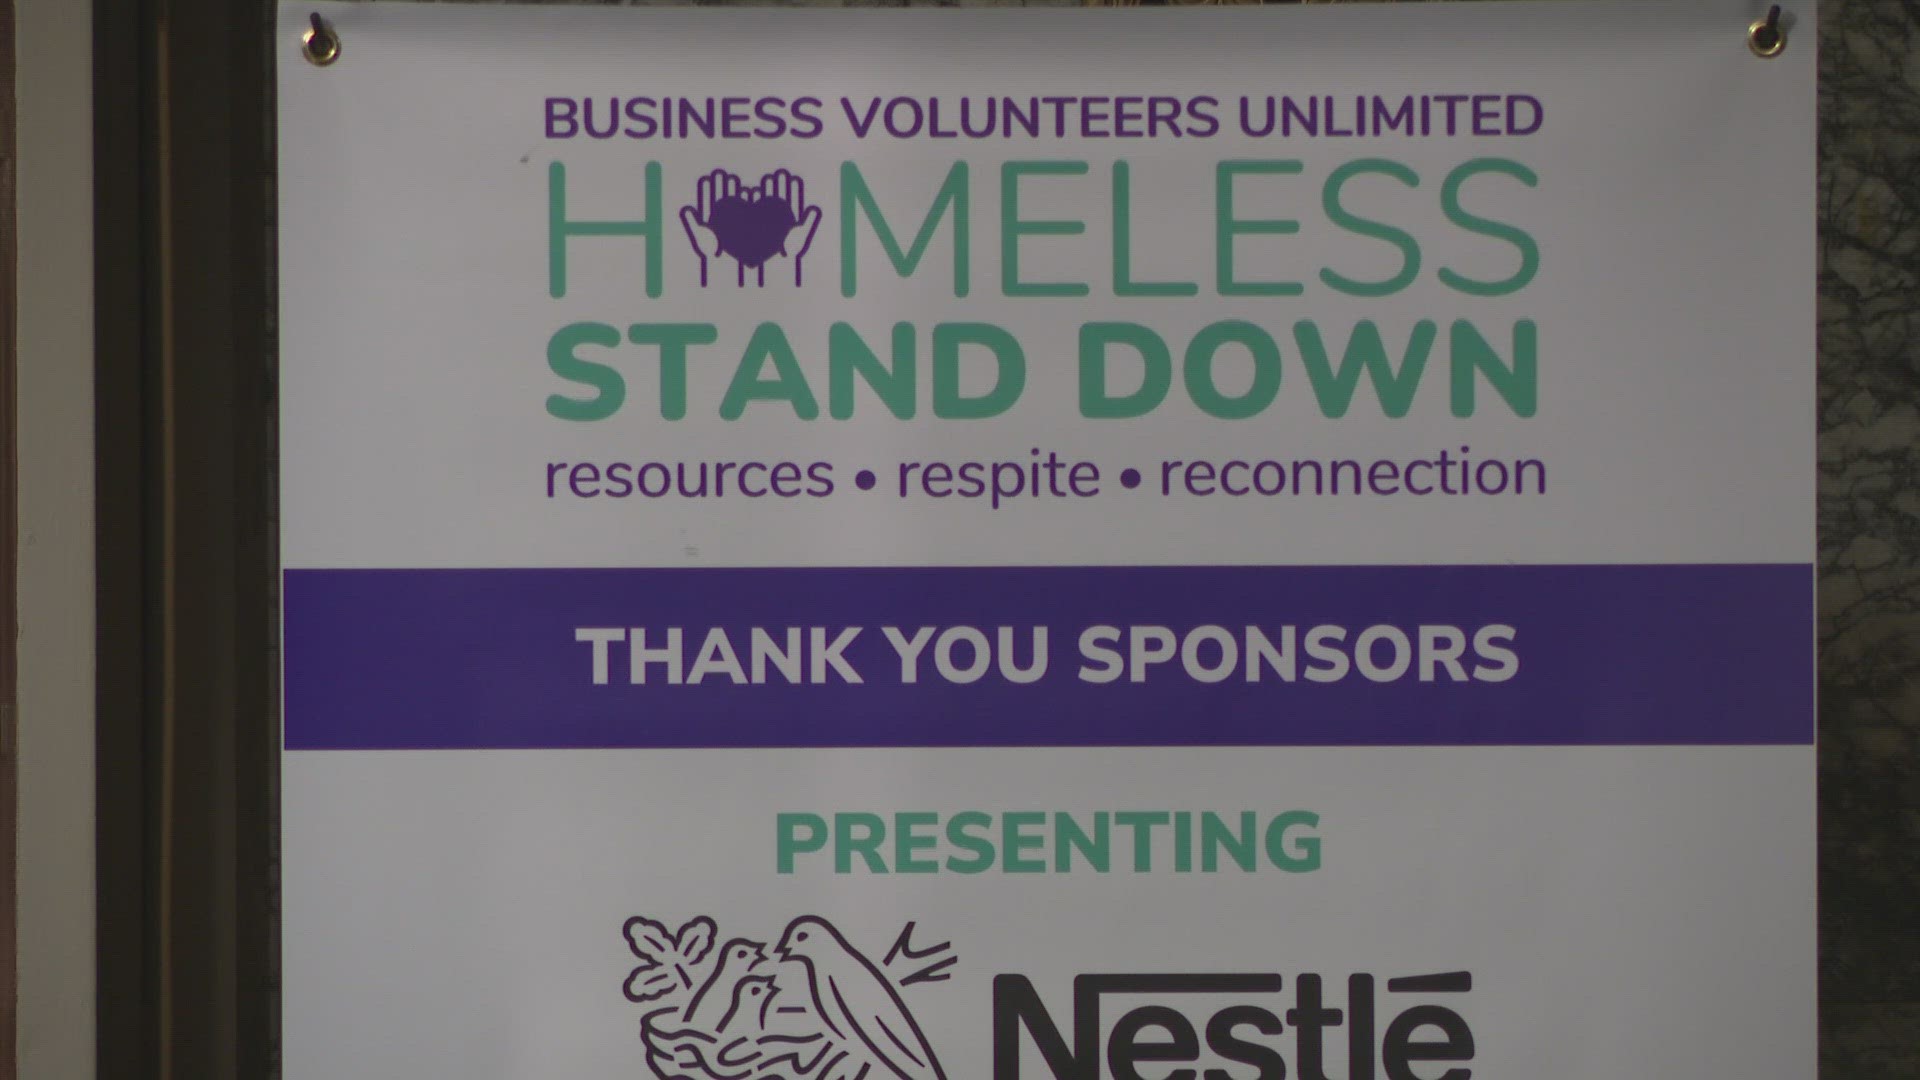 The event, put on by Business Volunteers Unlimited, is expected to help close to a thousand homeless people.